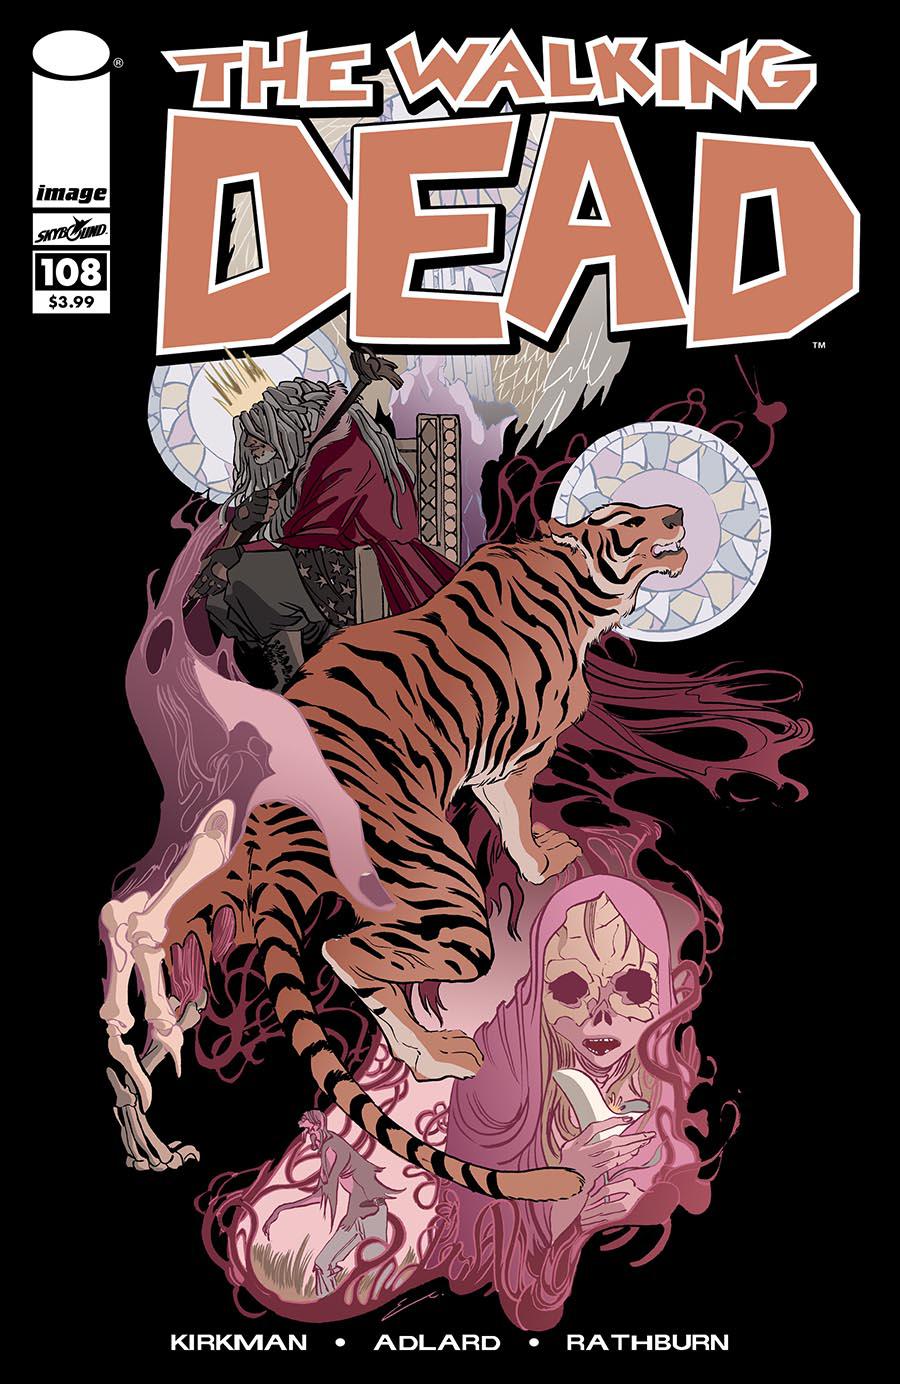 Walking Dead 15th Anniversary Blind Bag Edition #108 Cover B Emma Rios Color Cover Without Polybag